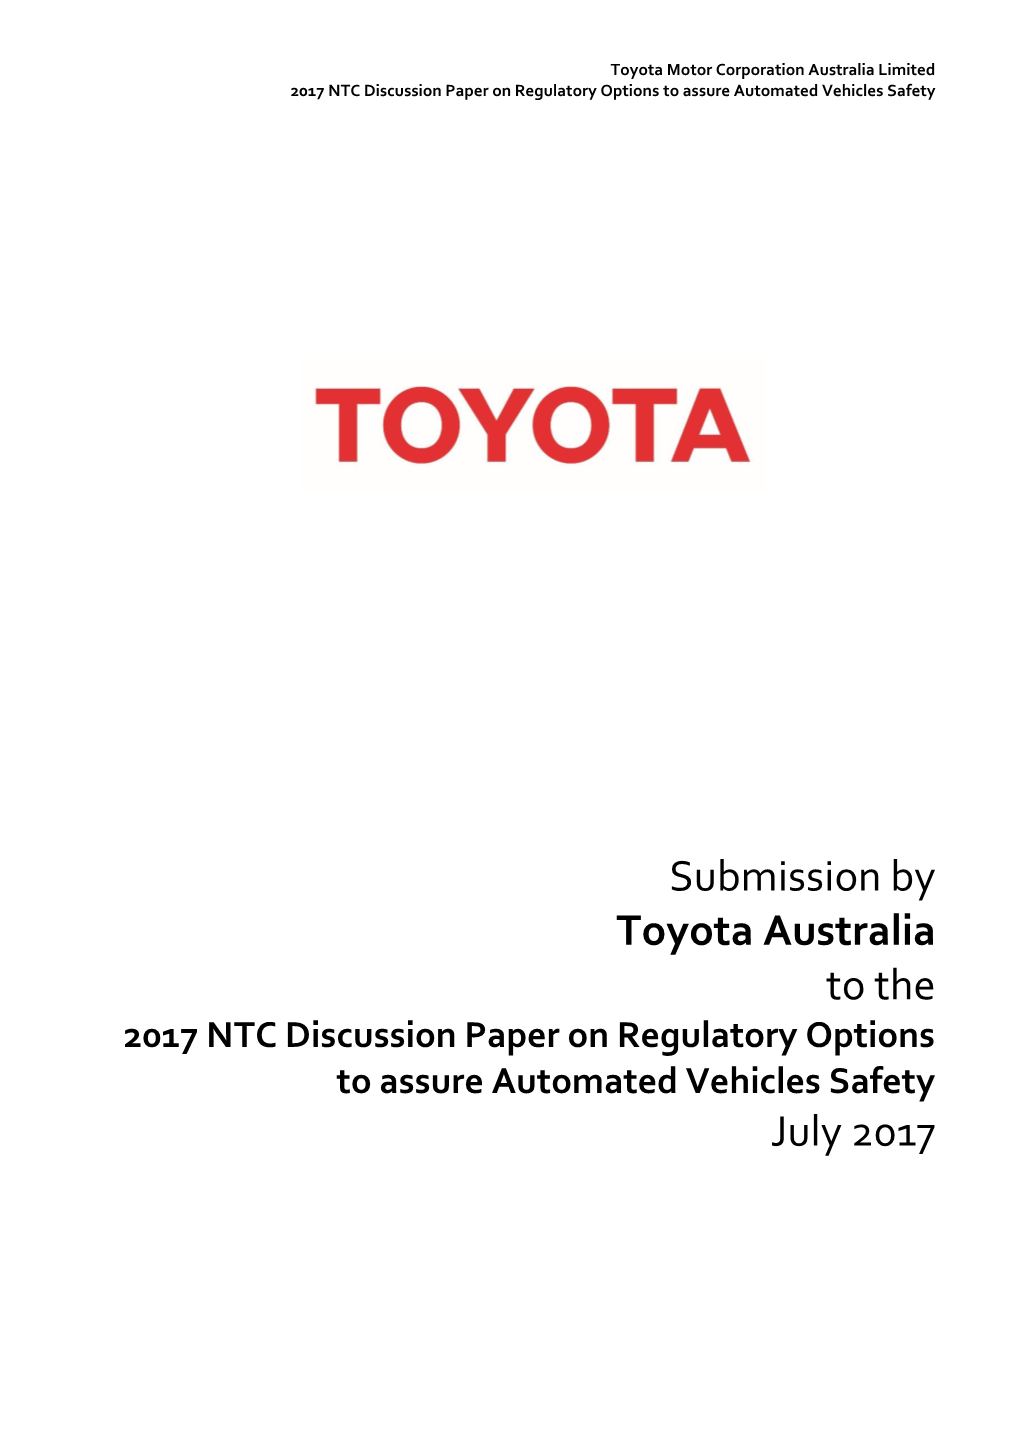 Toyota Australia to the 2017 NTC Discussion Paper on Regulatory Options to Assure Automated Vehicles Safety July 2017